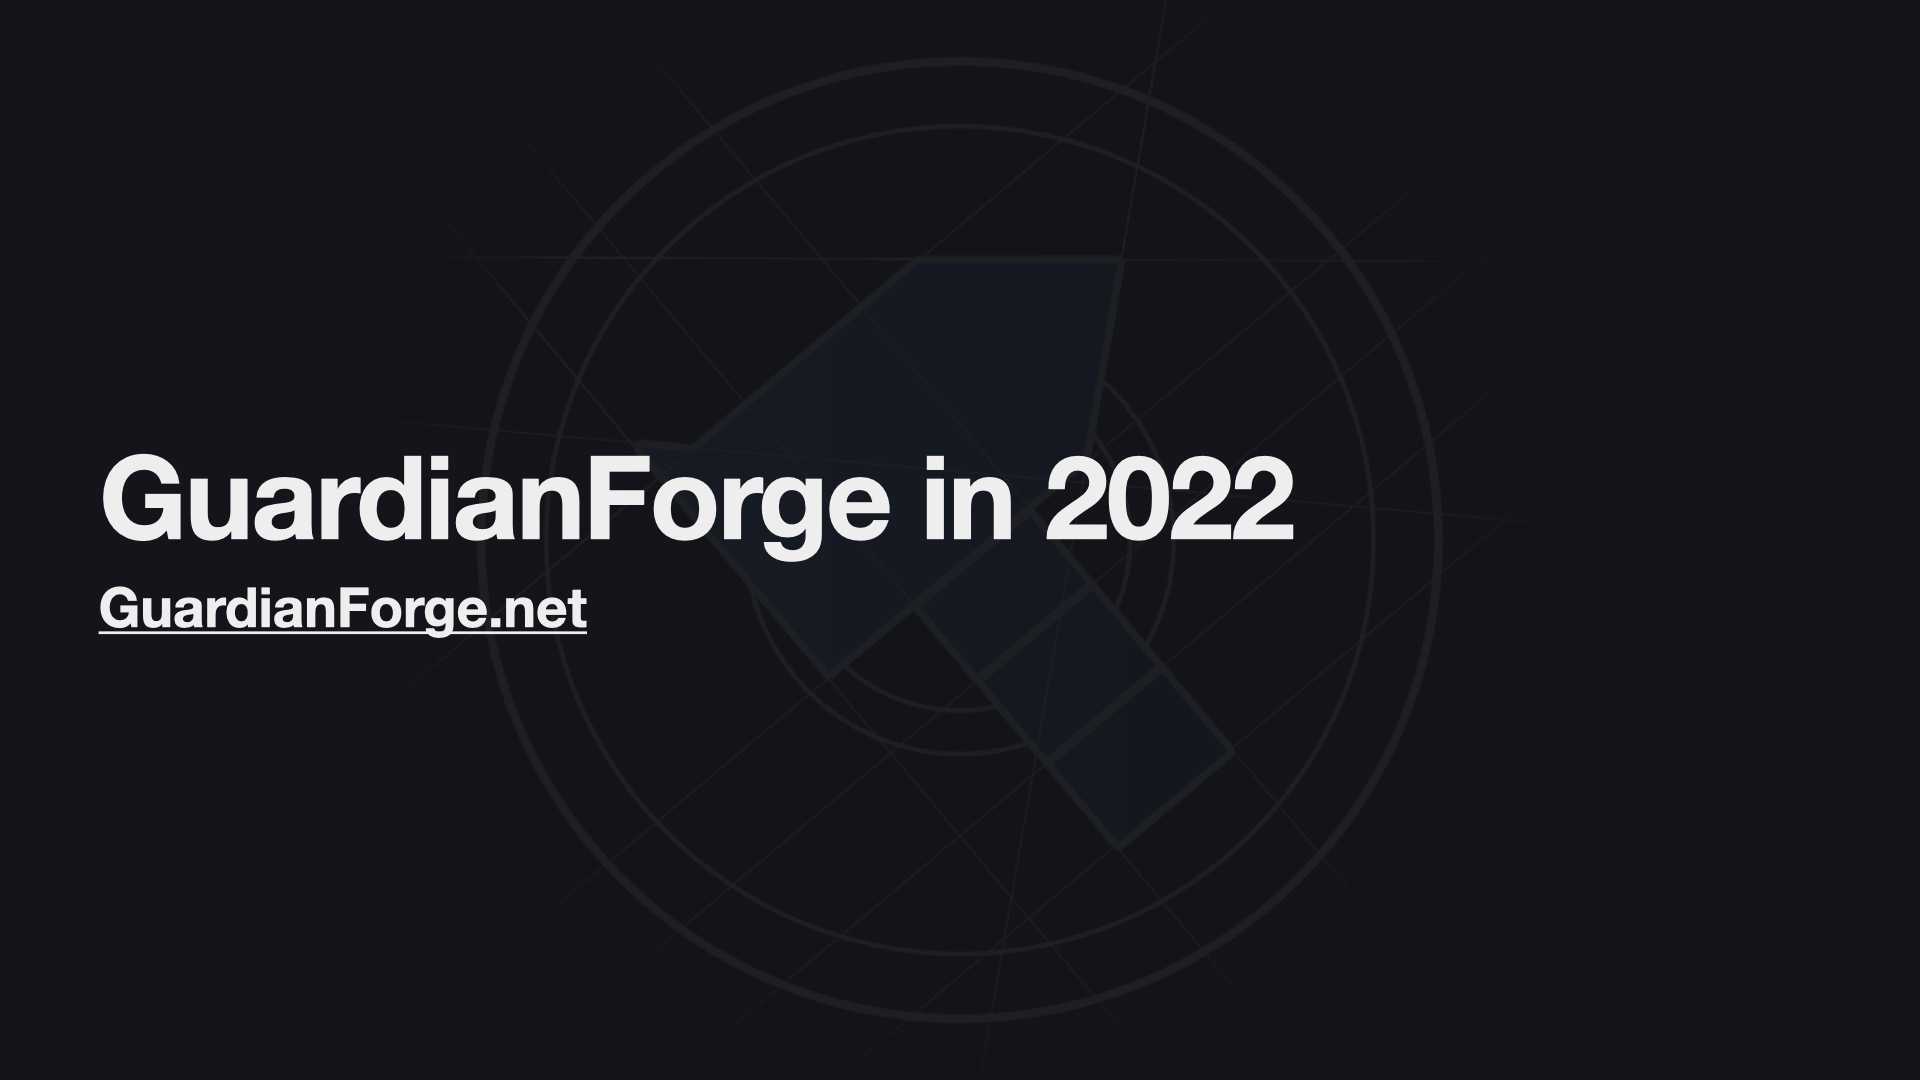 "GuardianForge in 2022" Featured Image